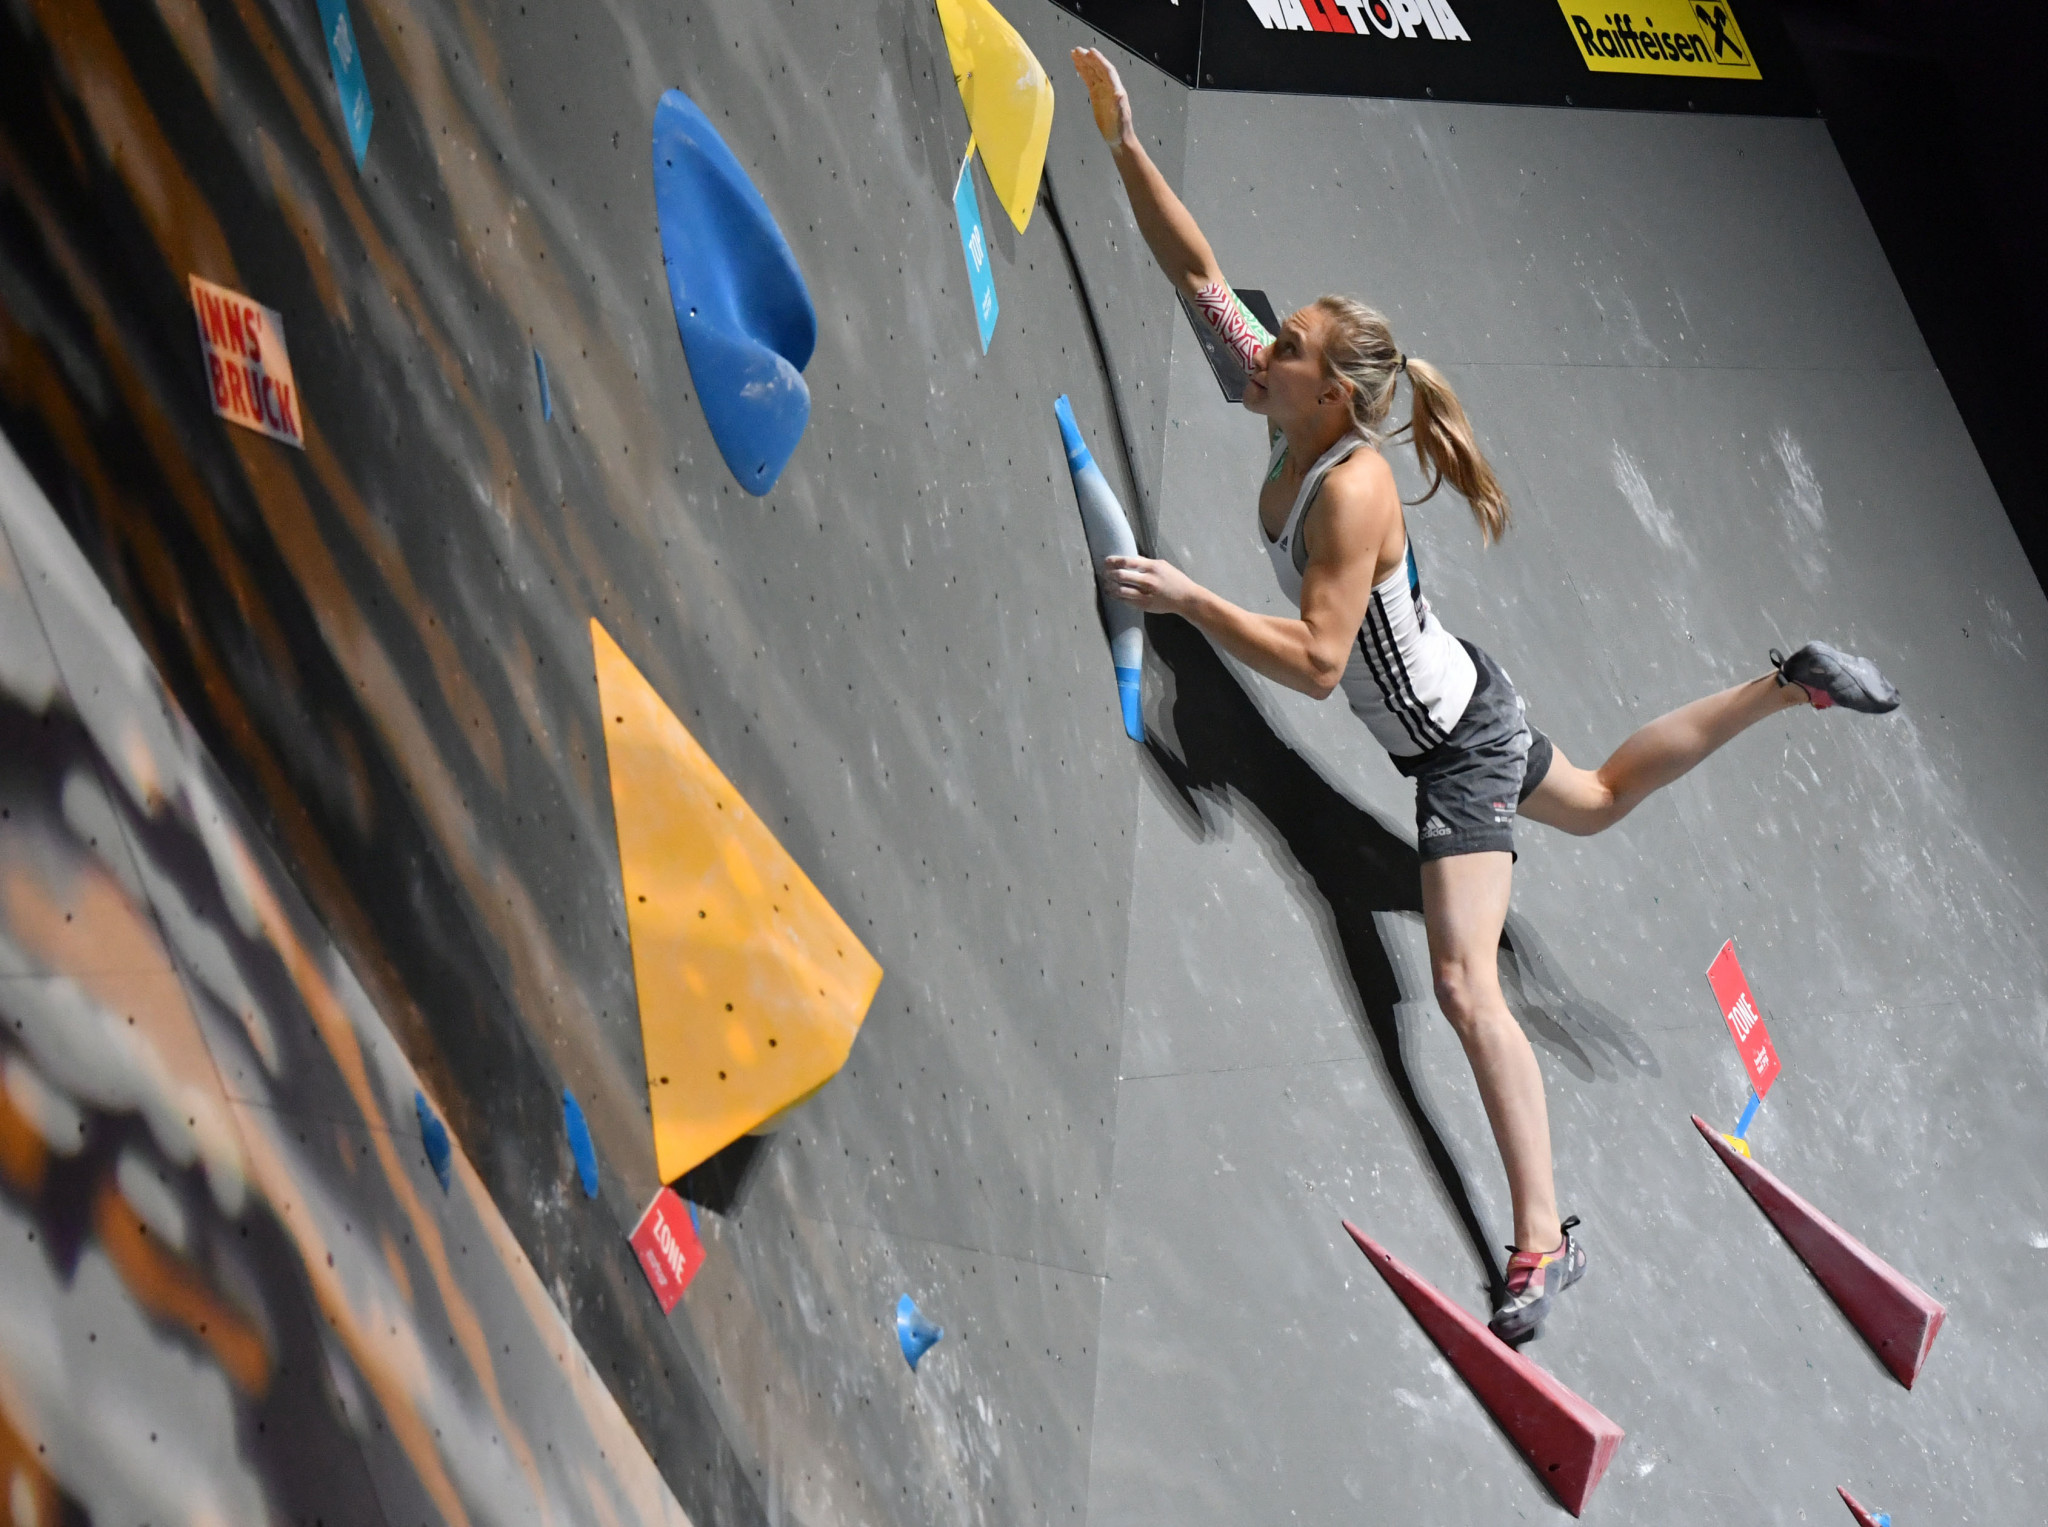 Garnbret on course to continue perfect start to IFSC World Cup season